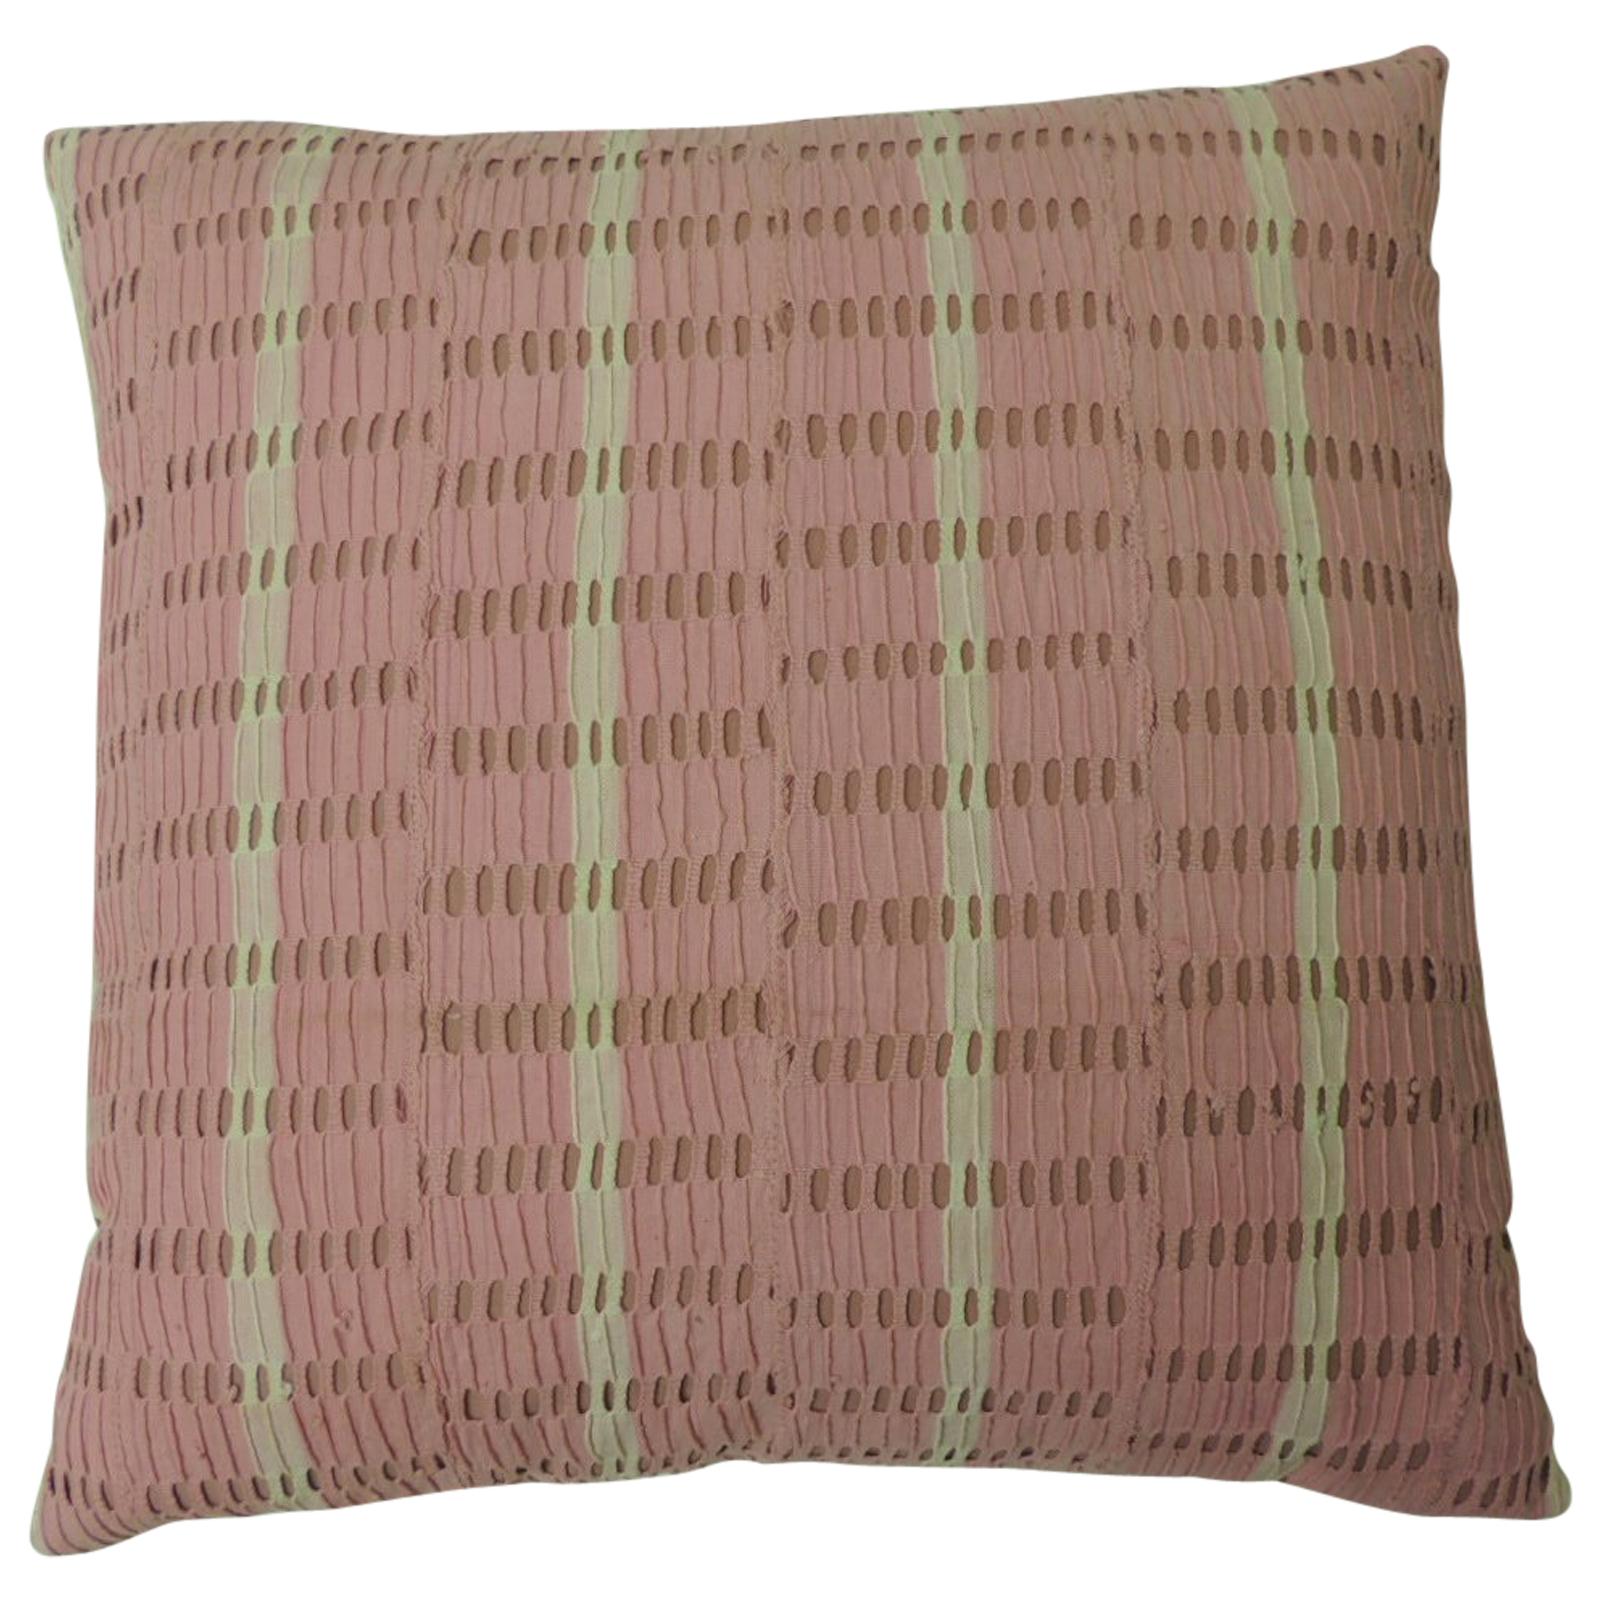 Vintage Pink and Natural African Woven Decorative Throw Pillows